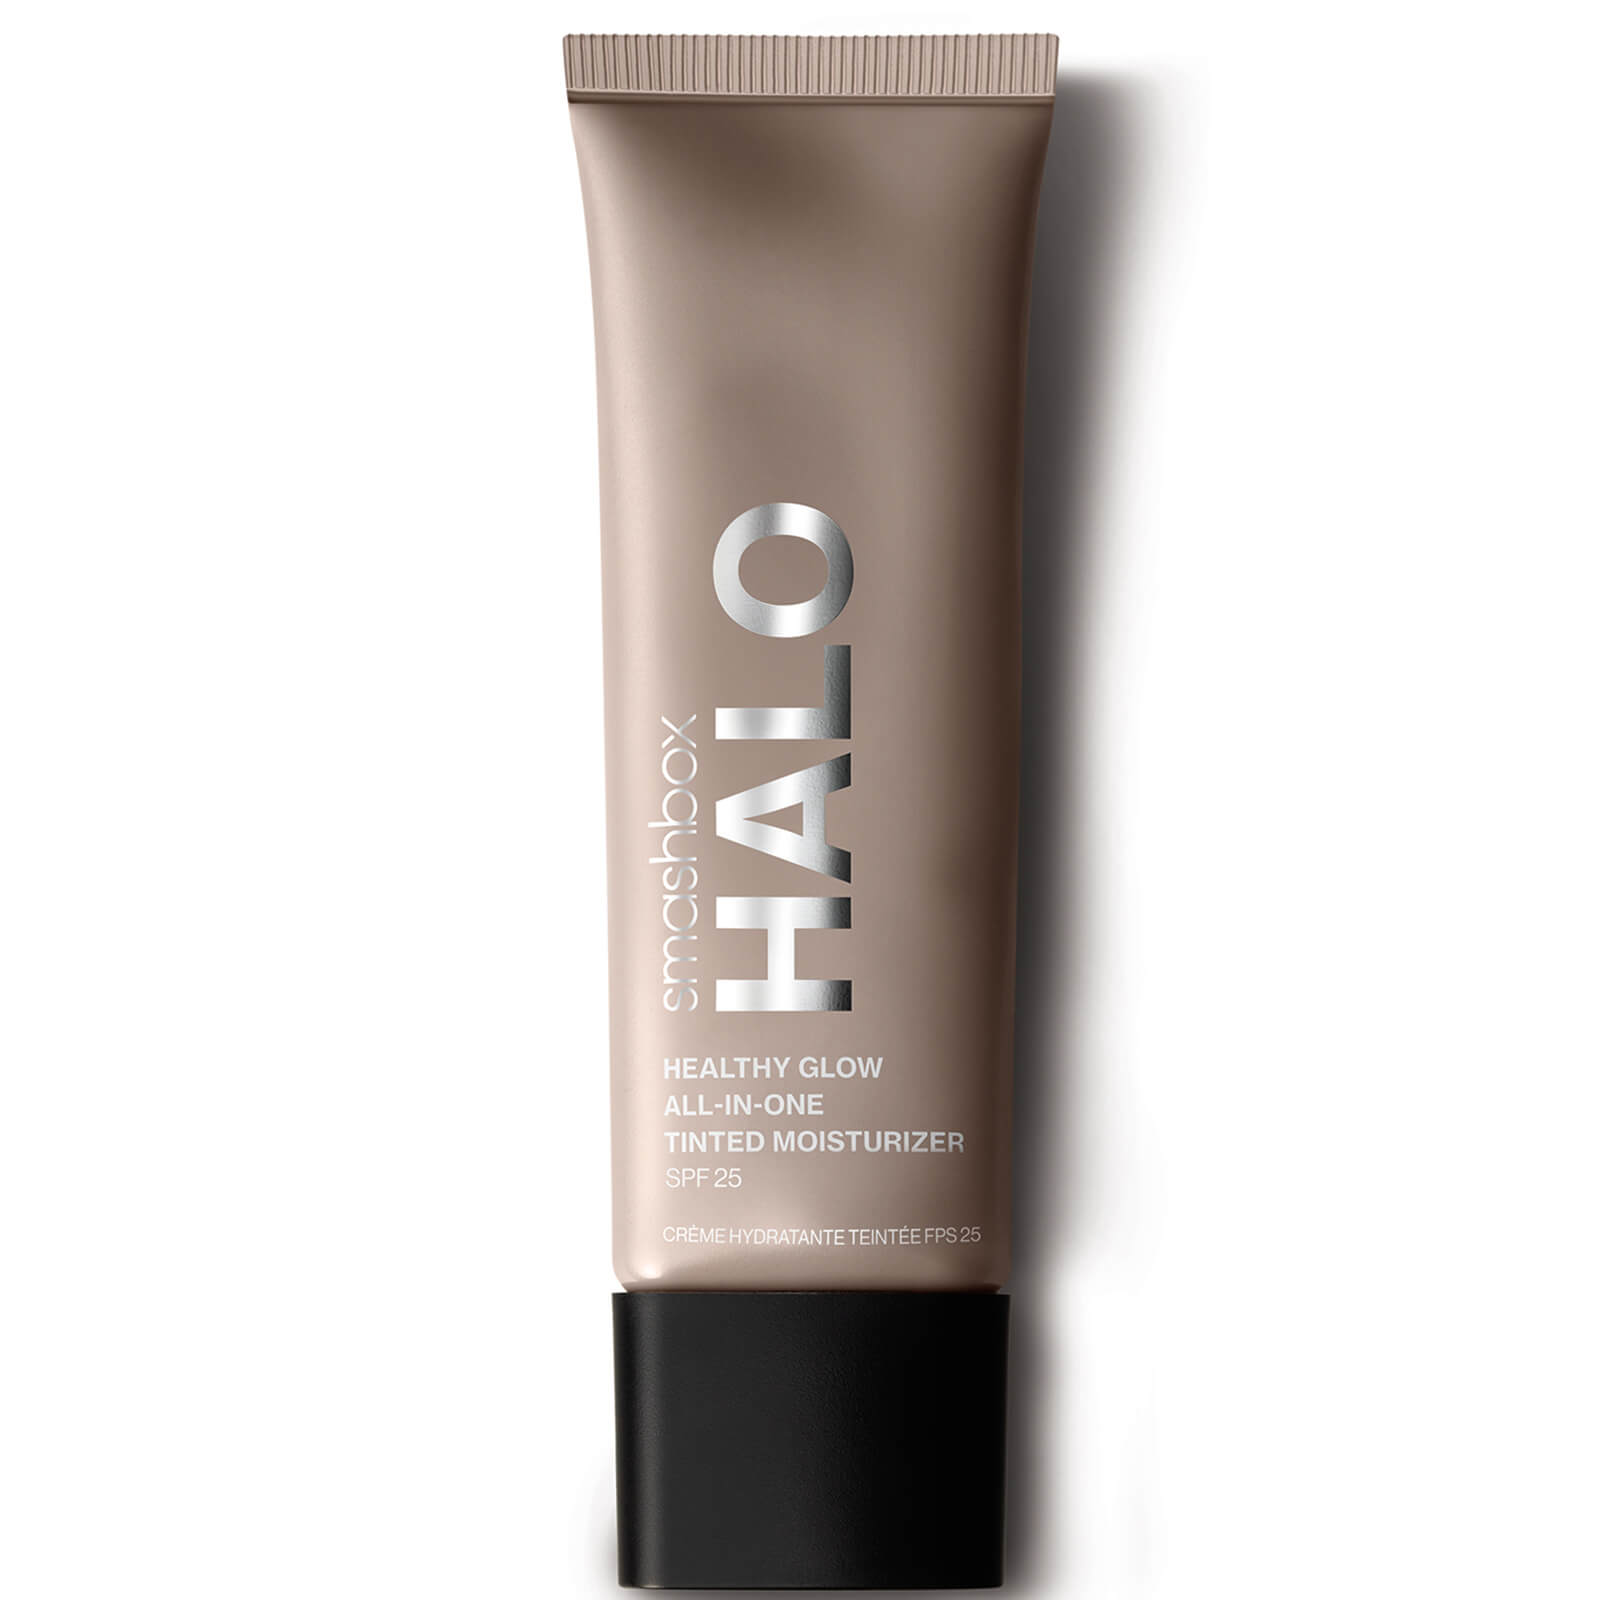 Smashbox Halo Healthy Glow All-in-One SPF25 Tinted Moisturiser 40ml (Various Shades) - Light Olive